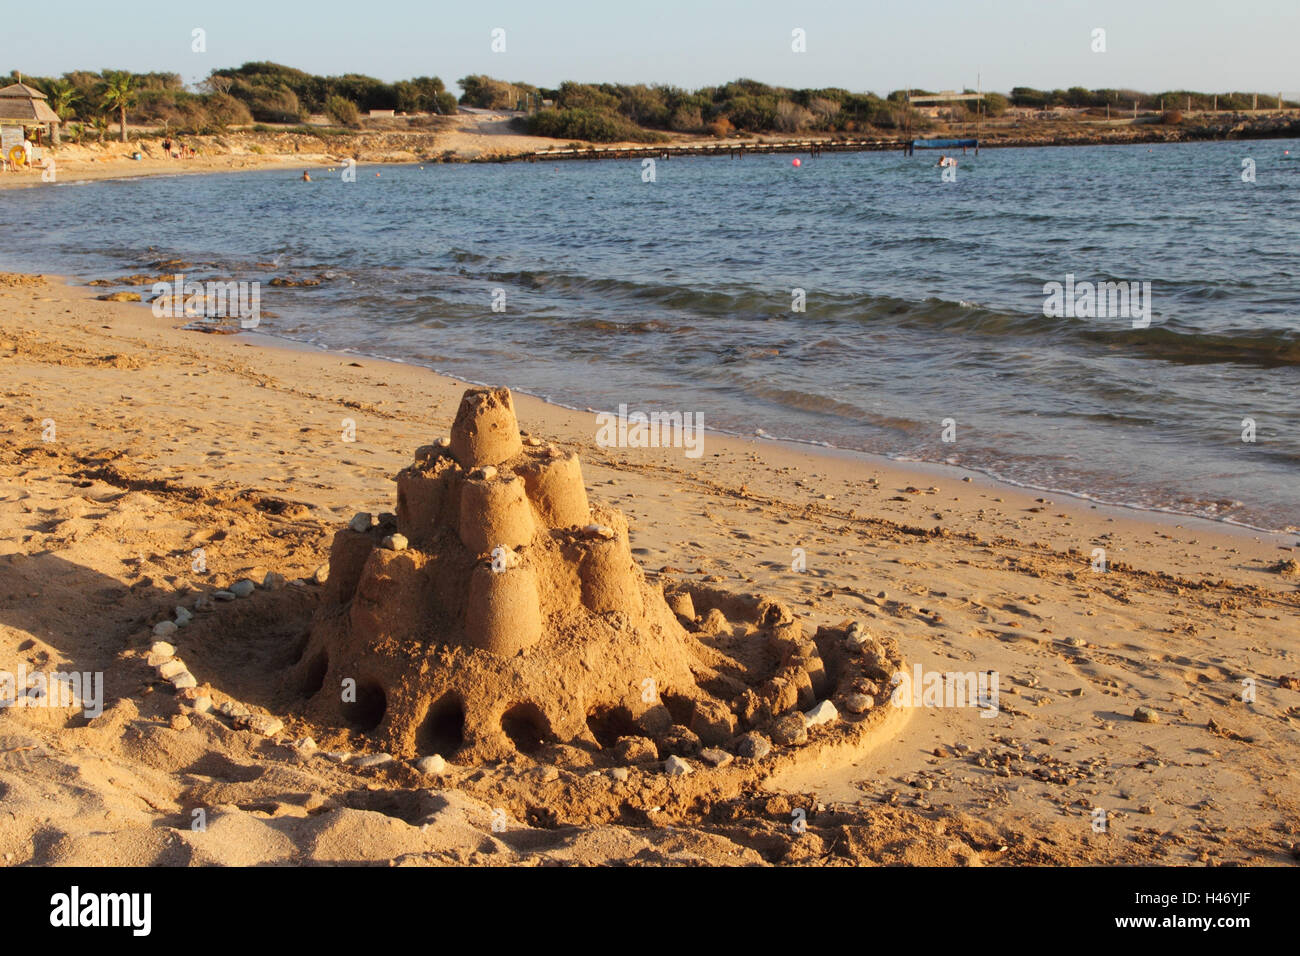 Sand castle by the sea, south coast Cyprus, Stock Photo